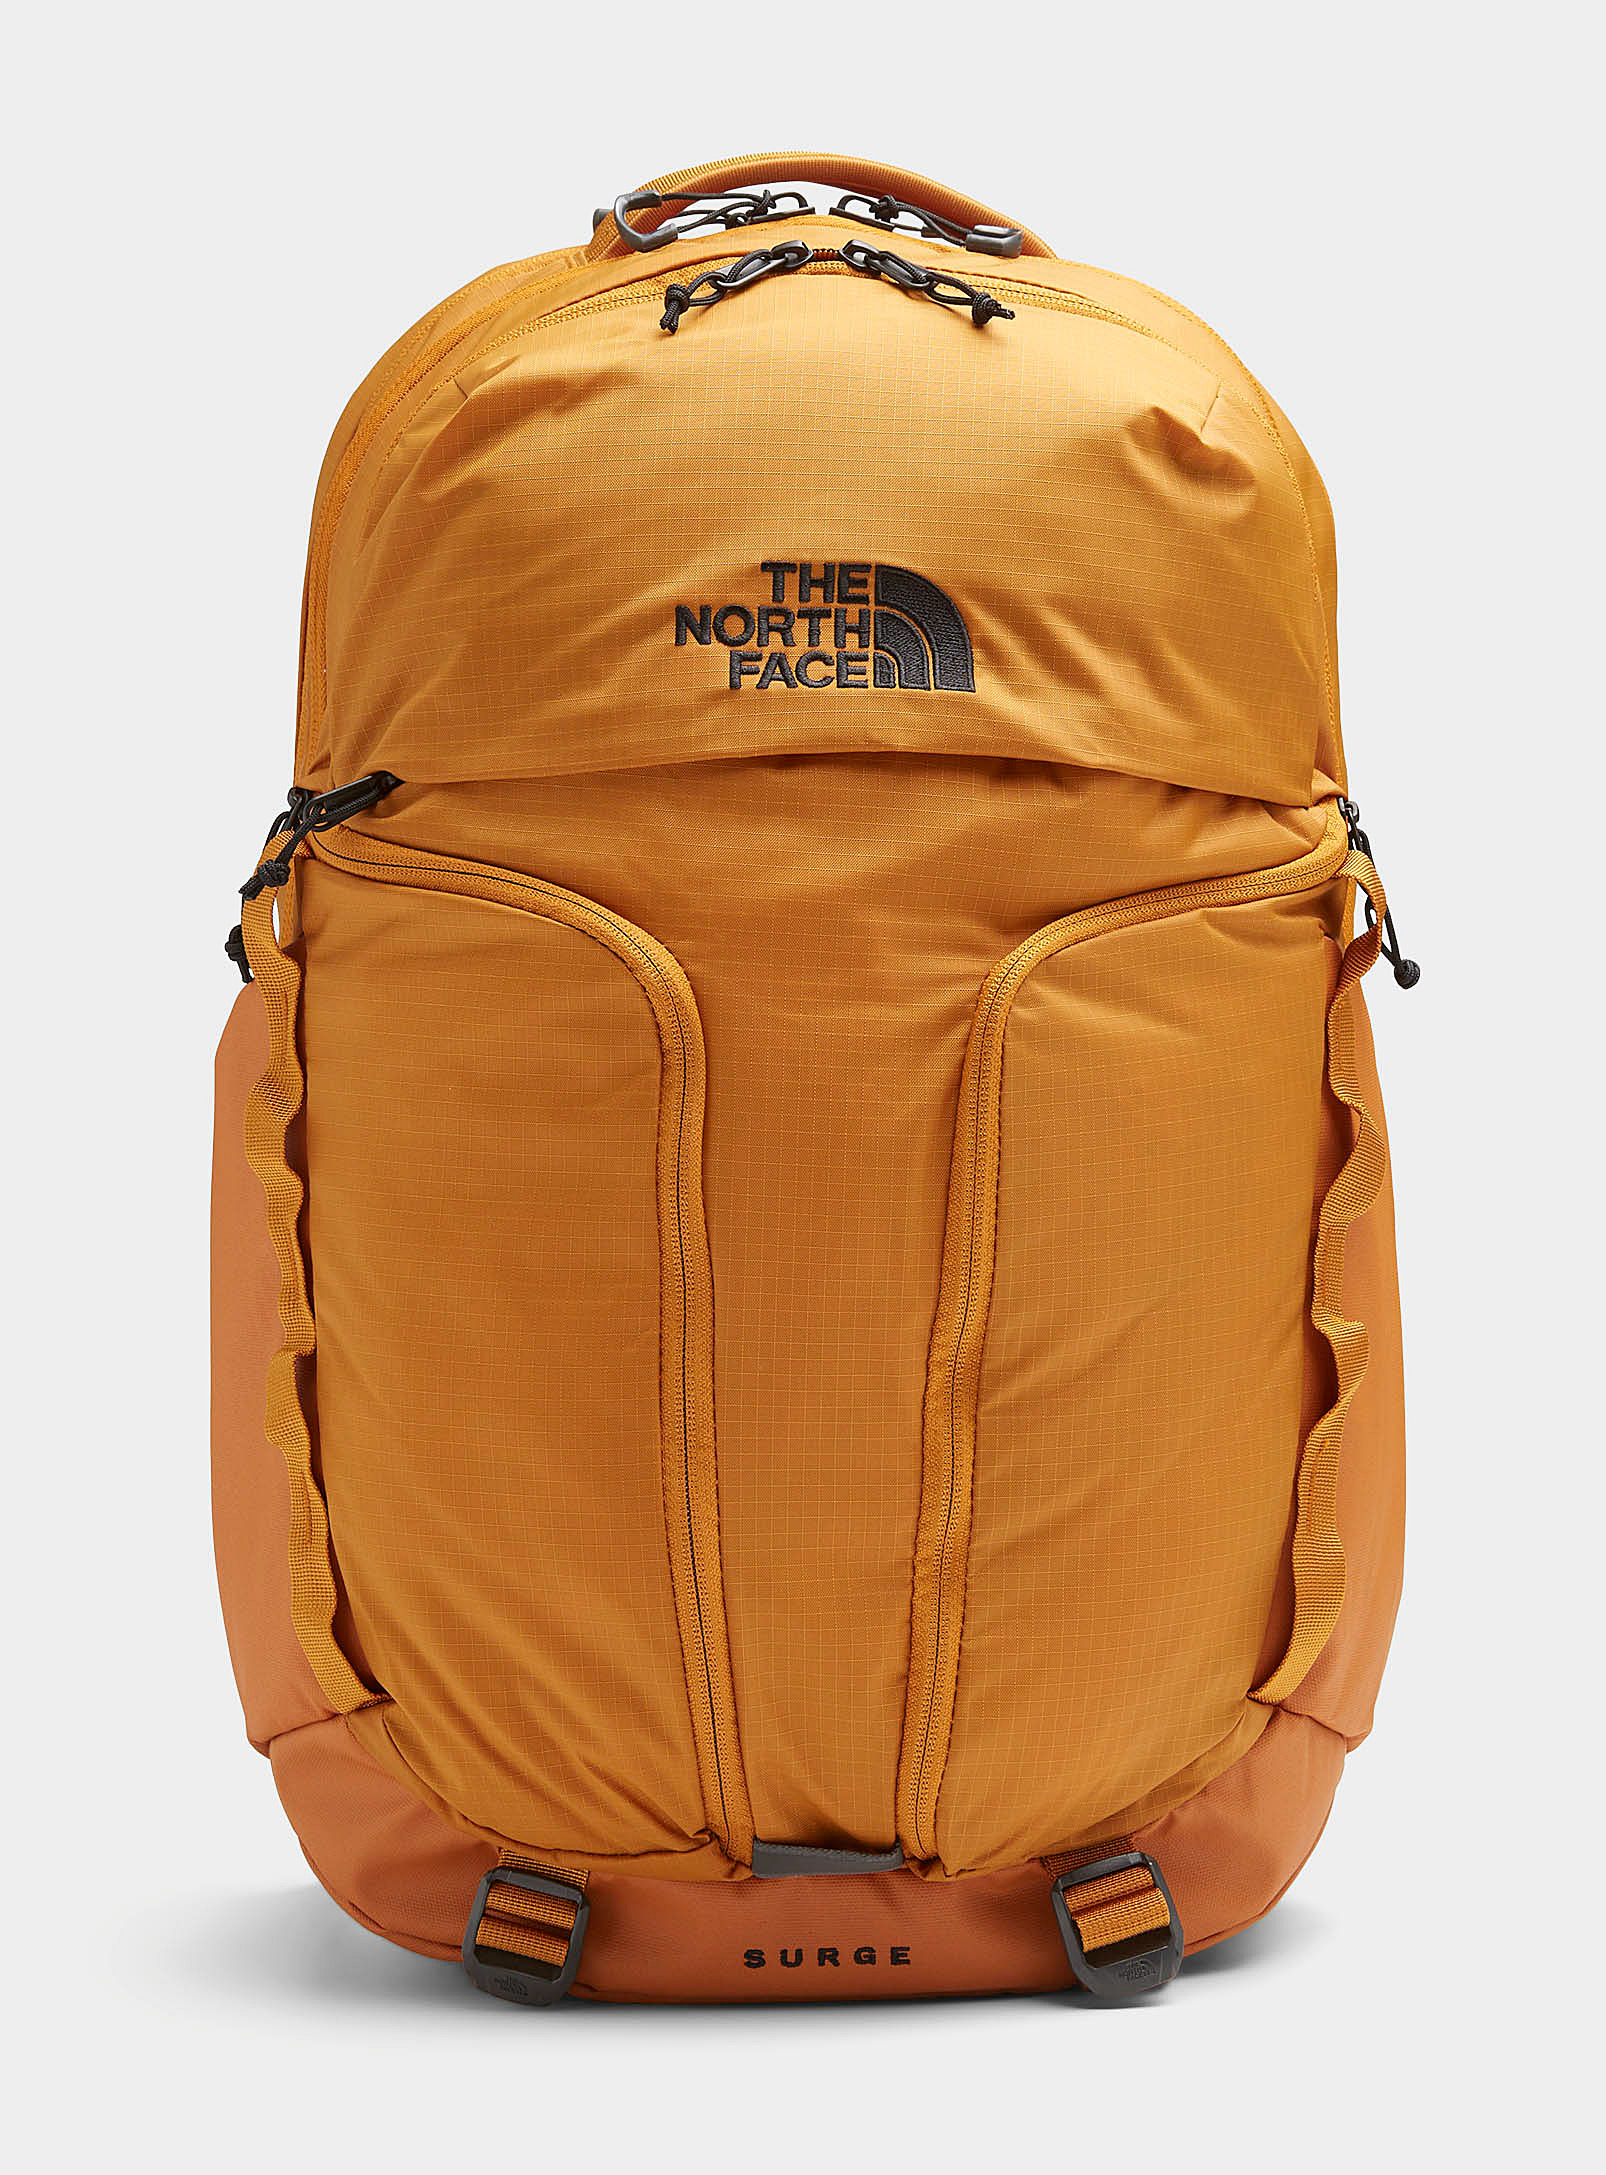 The North Face - Men's Mustard-yellow Surge backpack